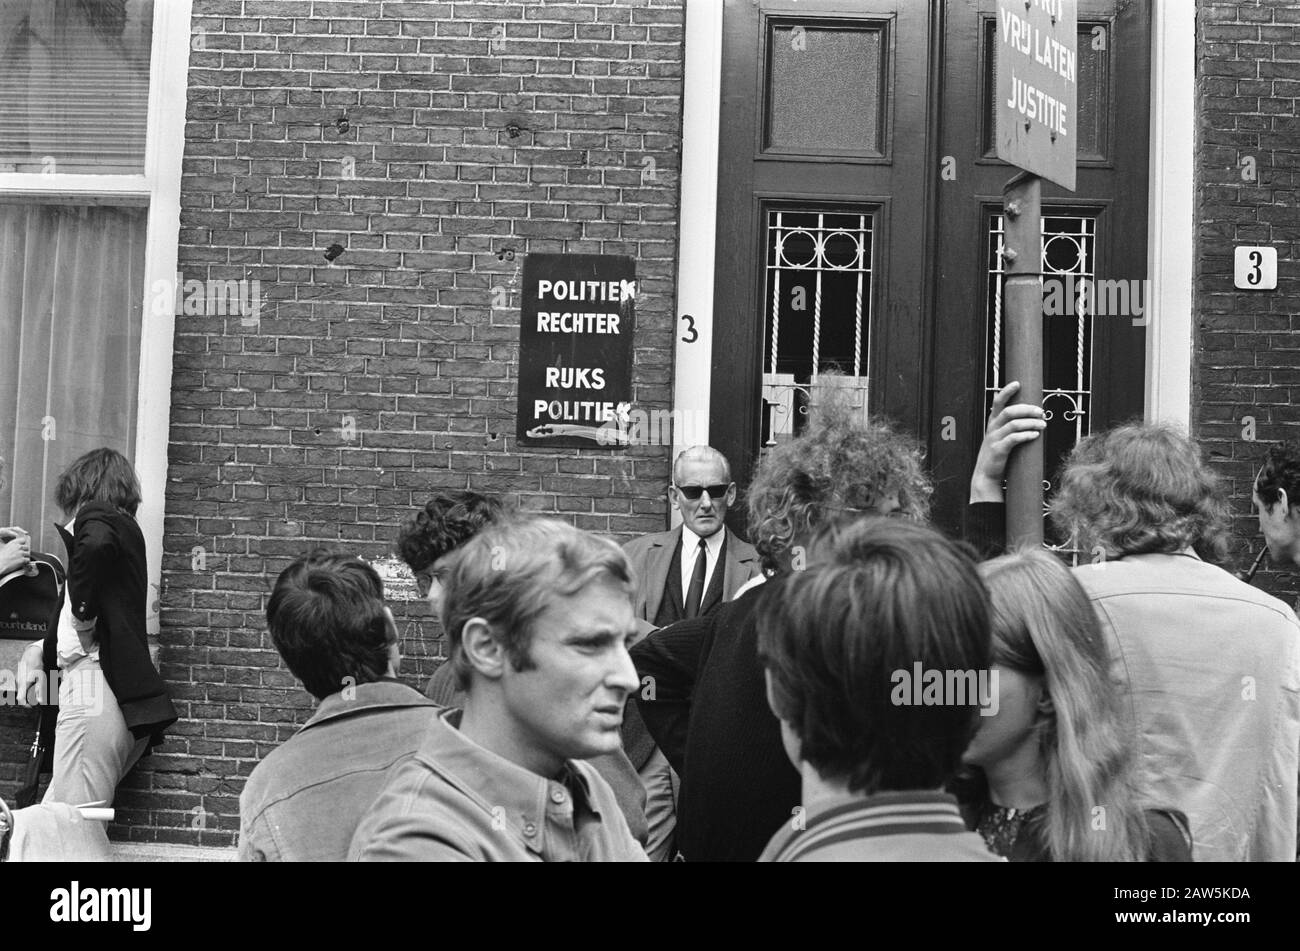 Artists protest trial Maagdenhuis Occupants, Amsterdam, at Palace of Justice plate Politics judge Date: June 17, 1969 Location: Amsterdam, Noord-Holland Keywords: ARTISTS, occupiers, signs Person Name: Palace of Justice Stock Photo